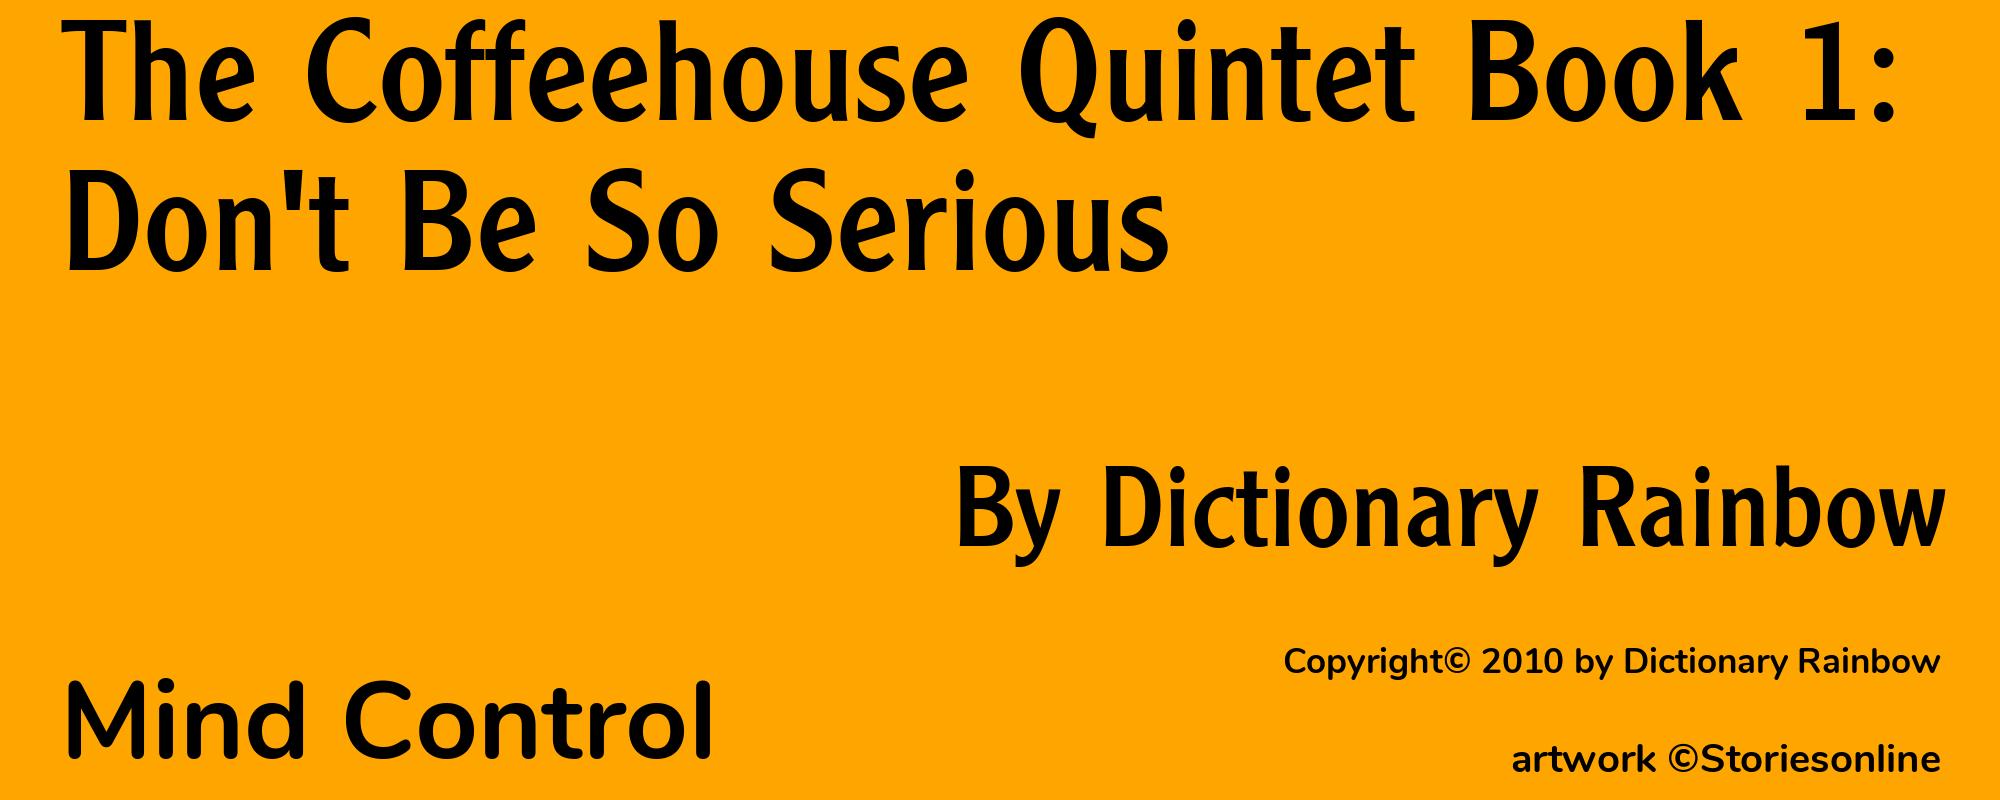 The Coffeehouse Quintet Book 1: Don't Be So Serious - Cover